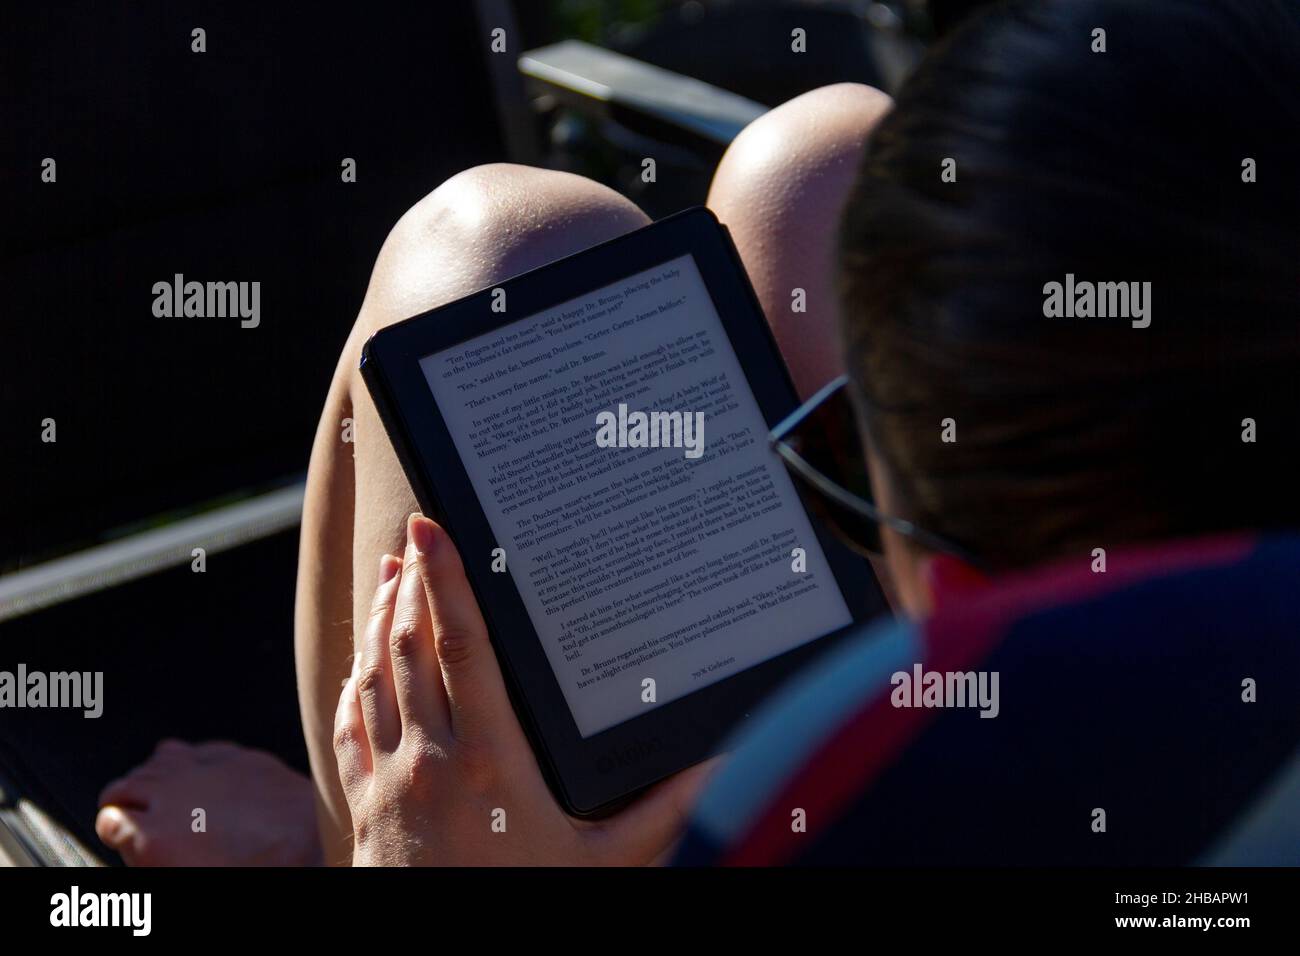 Brecht, Belgium - May 8 2018: A close up portrait of someone reading an e-book on an e-ink e-reader on a sunny day outside in the garden. An easy way Stock Photo